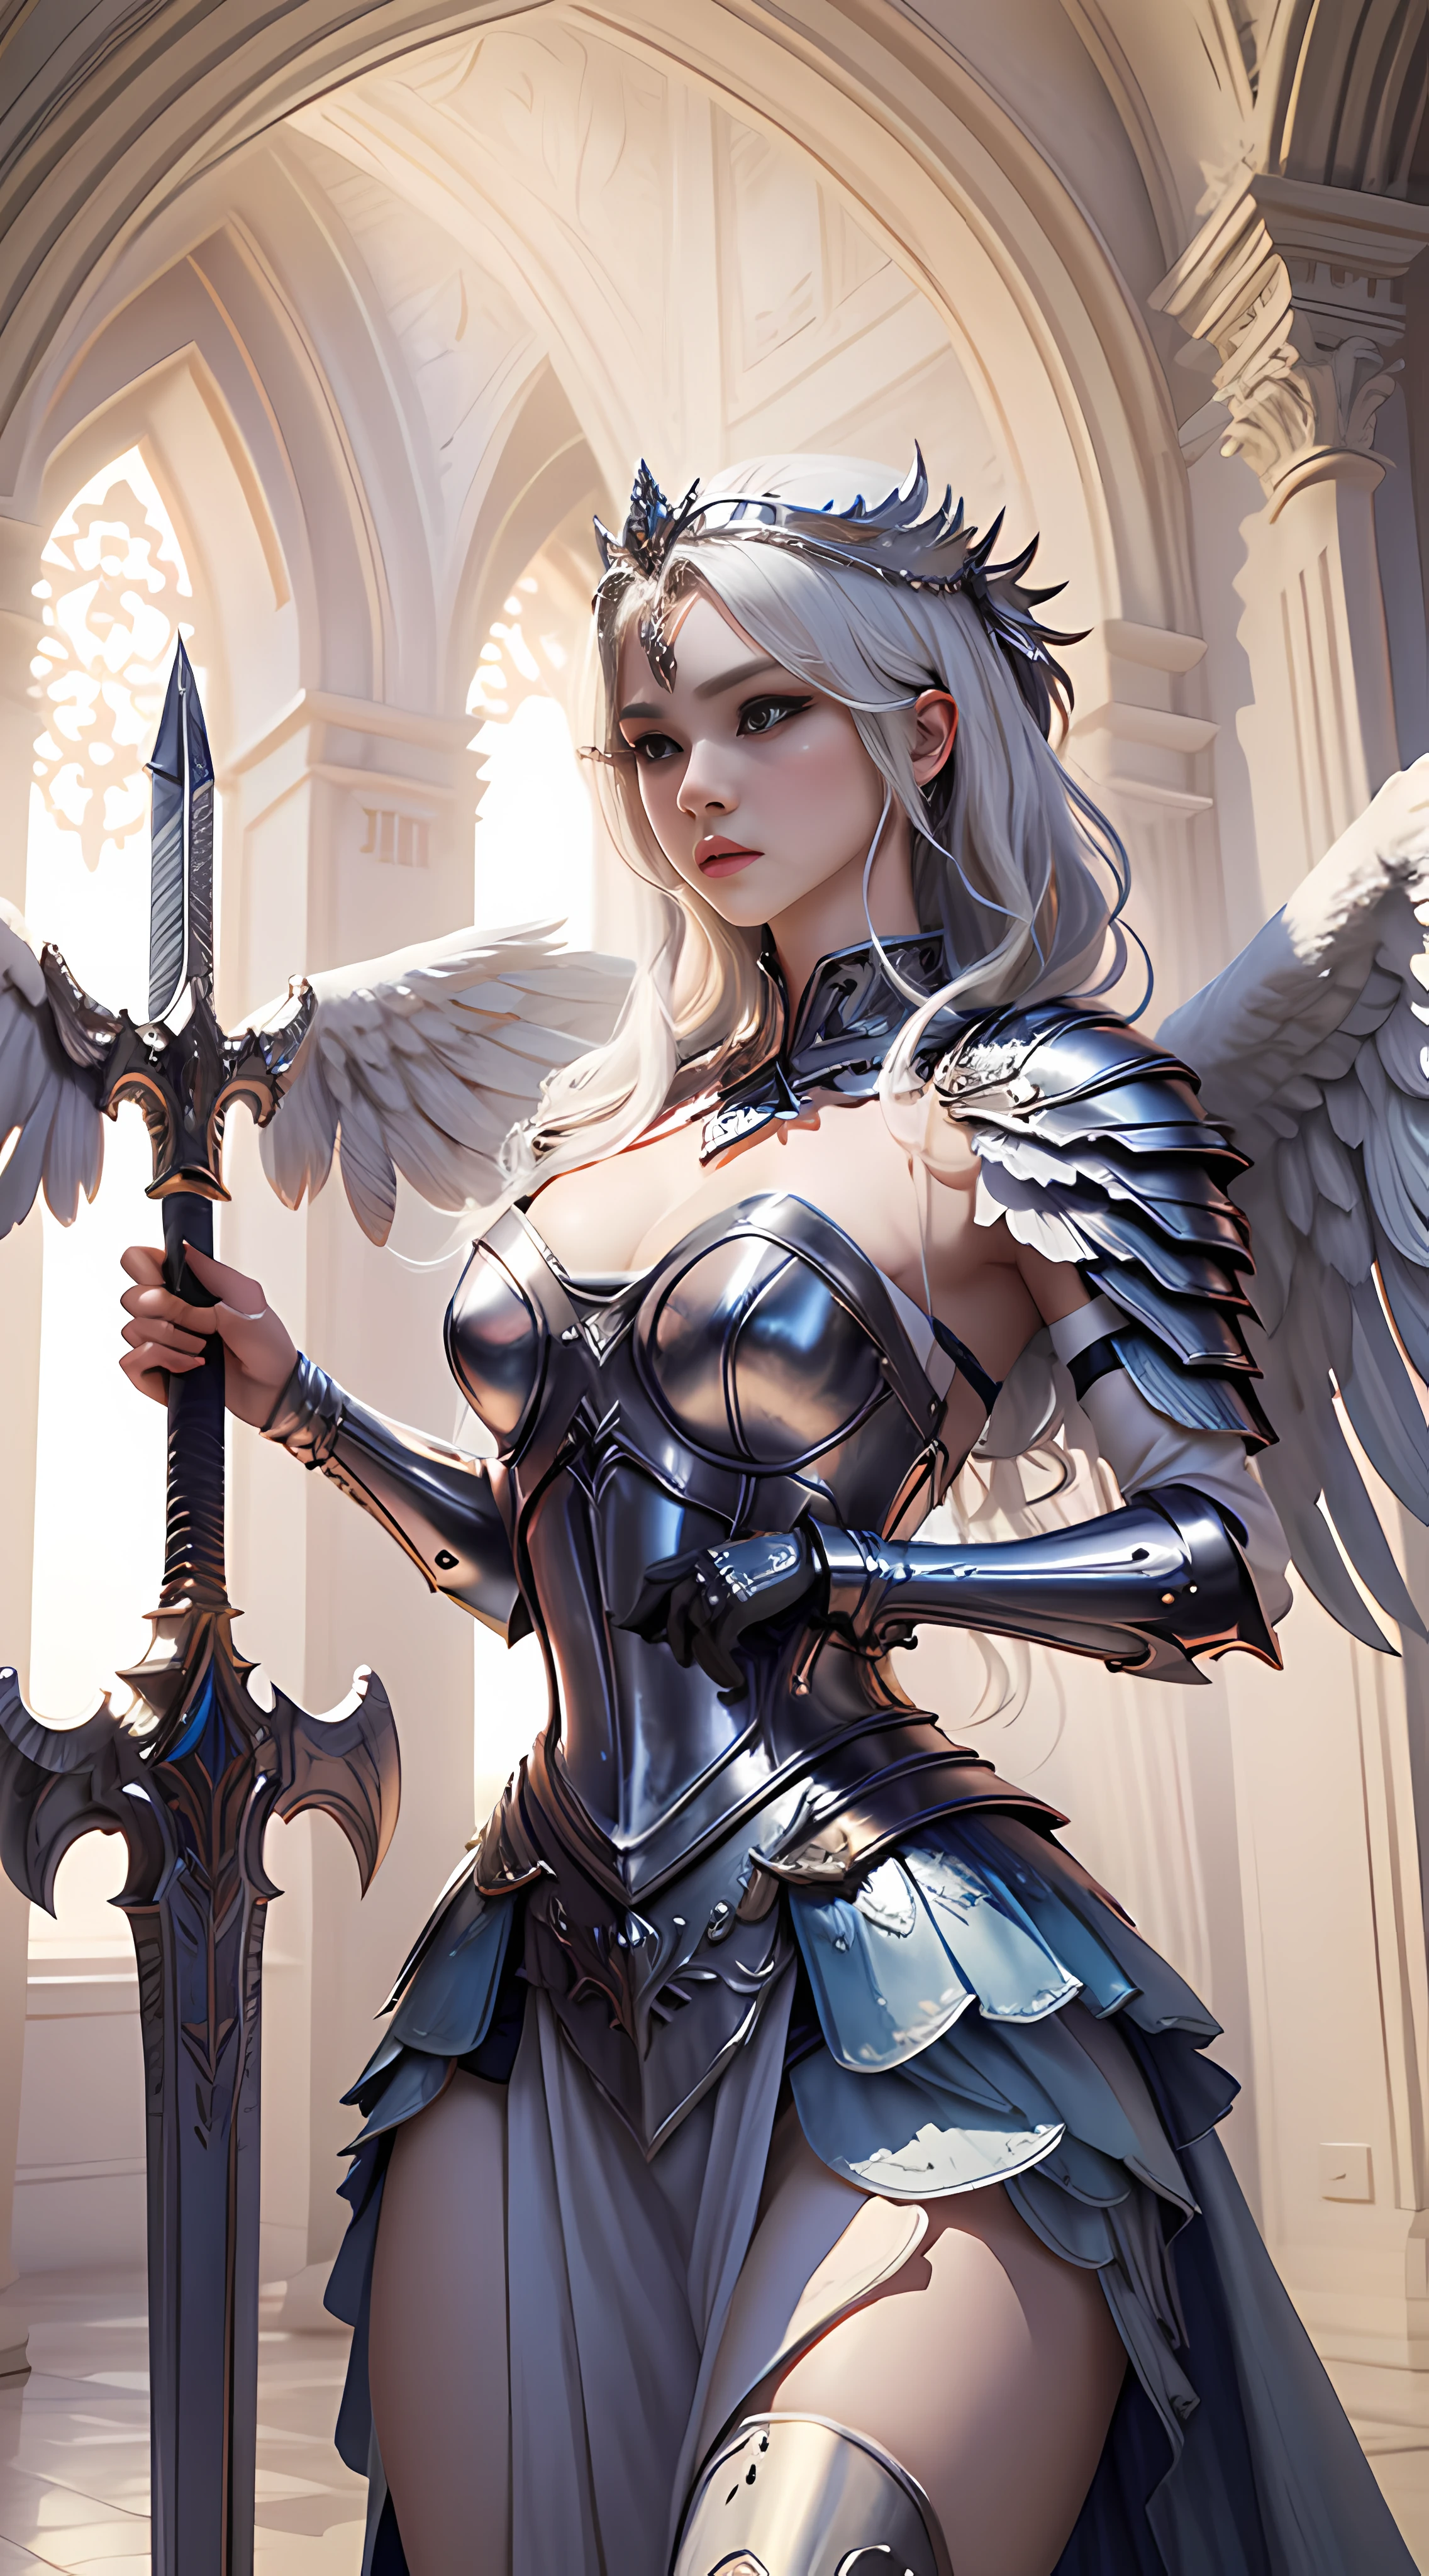 ((Best quality)), ((Masterpiece)), (Detailed),1girll,Solo,full bodyesbian , Valkyrie,angel,Valkyrie armor,Angel wings,winged helmet, woman,gaodanvshen, [sword:Fire:0.3] and [a shield:Ice:0.3],Sword and shield